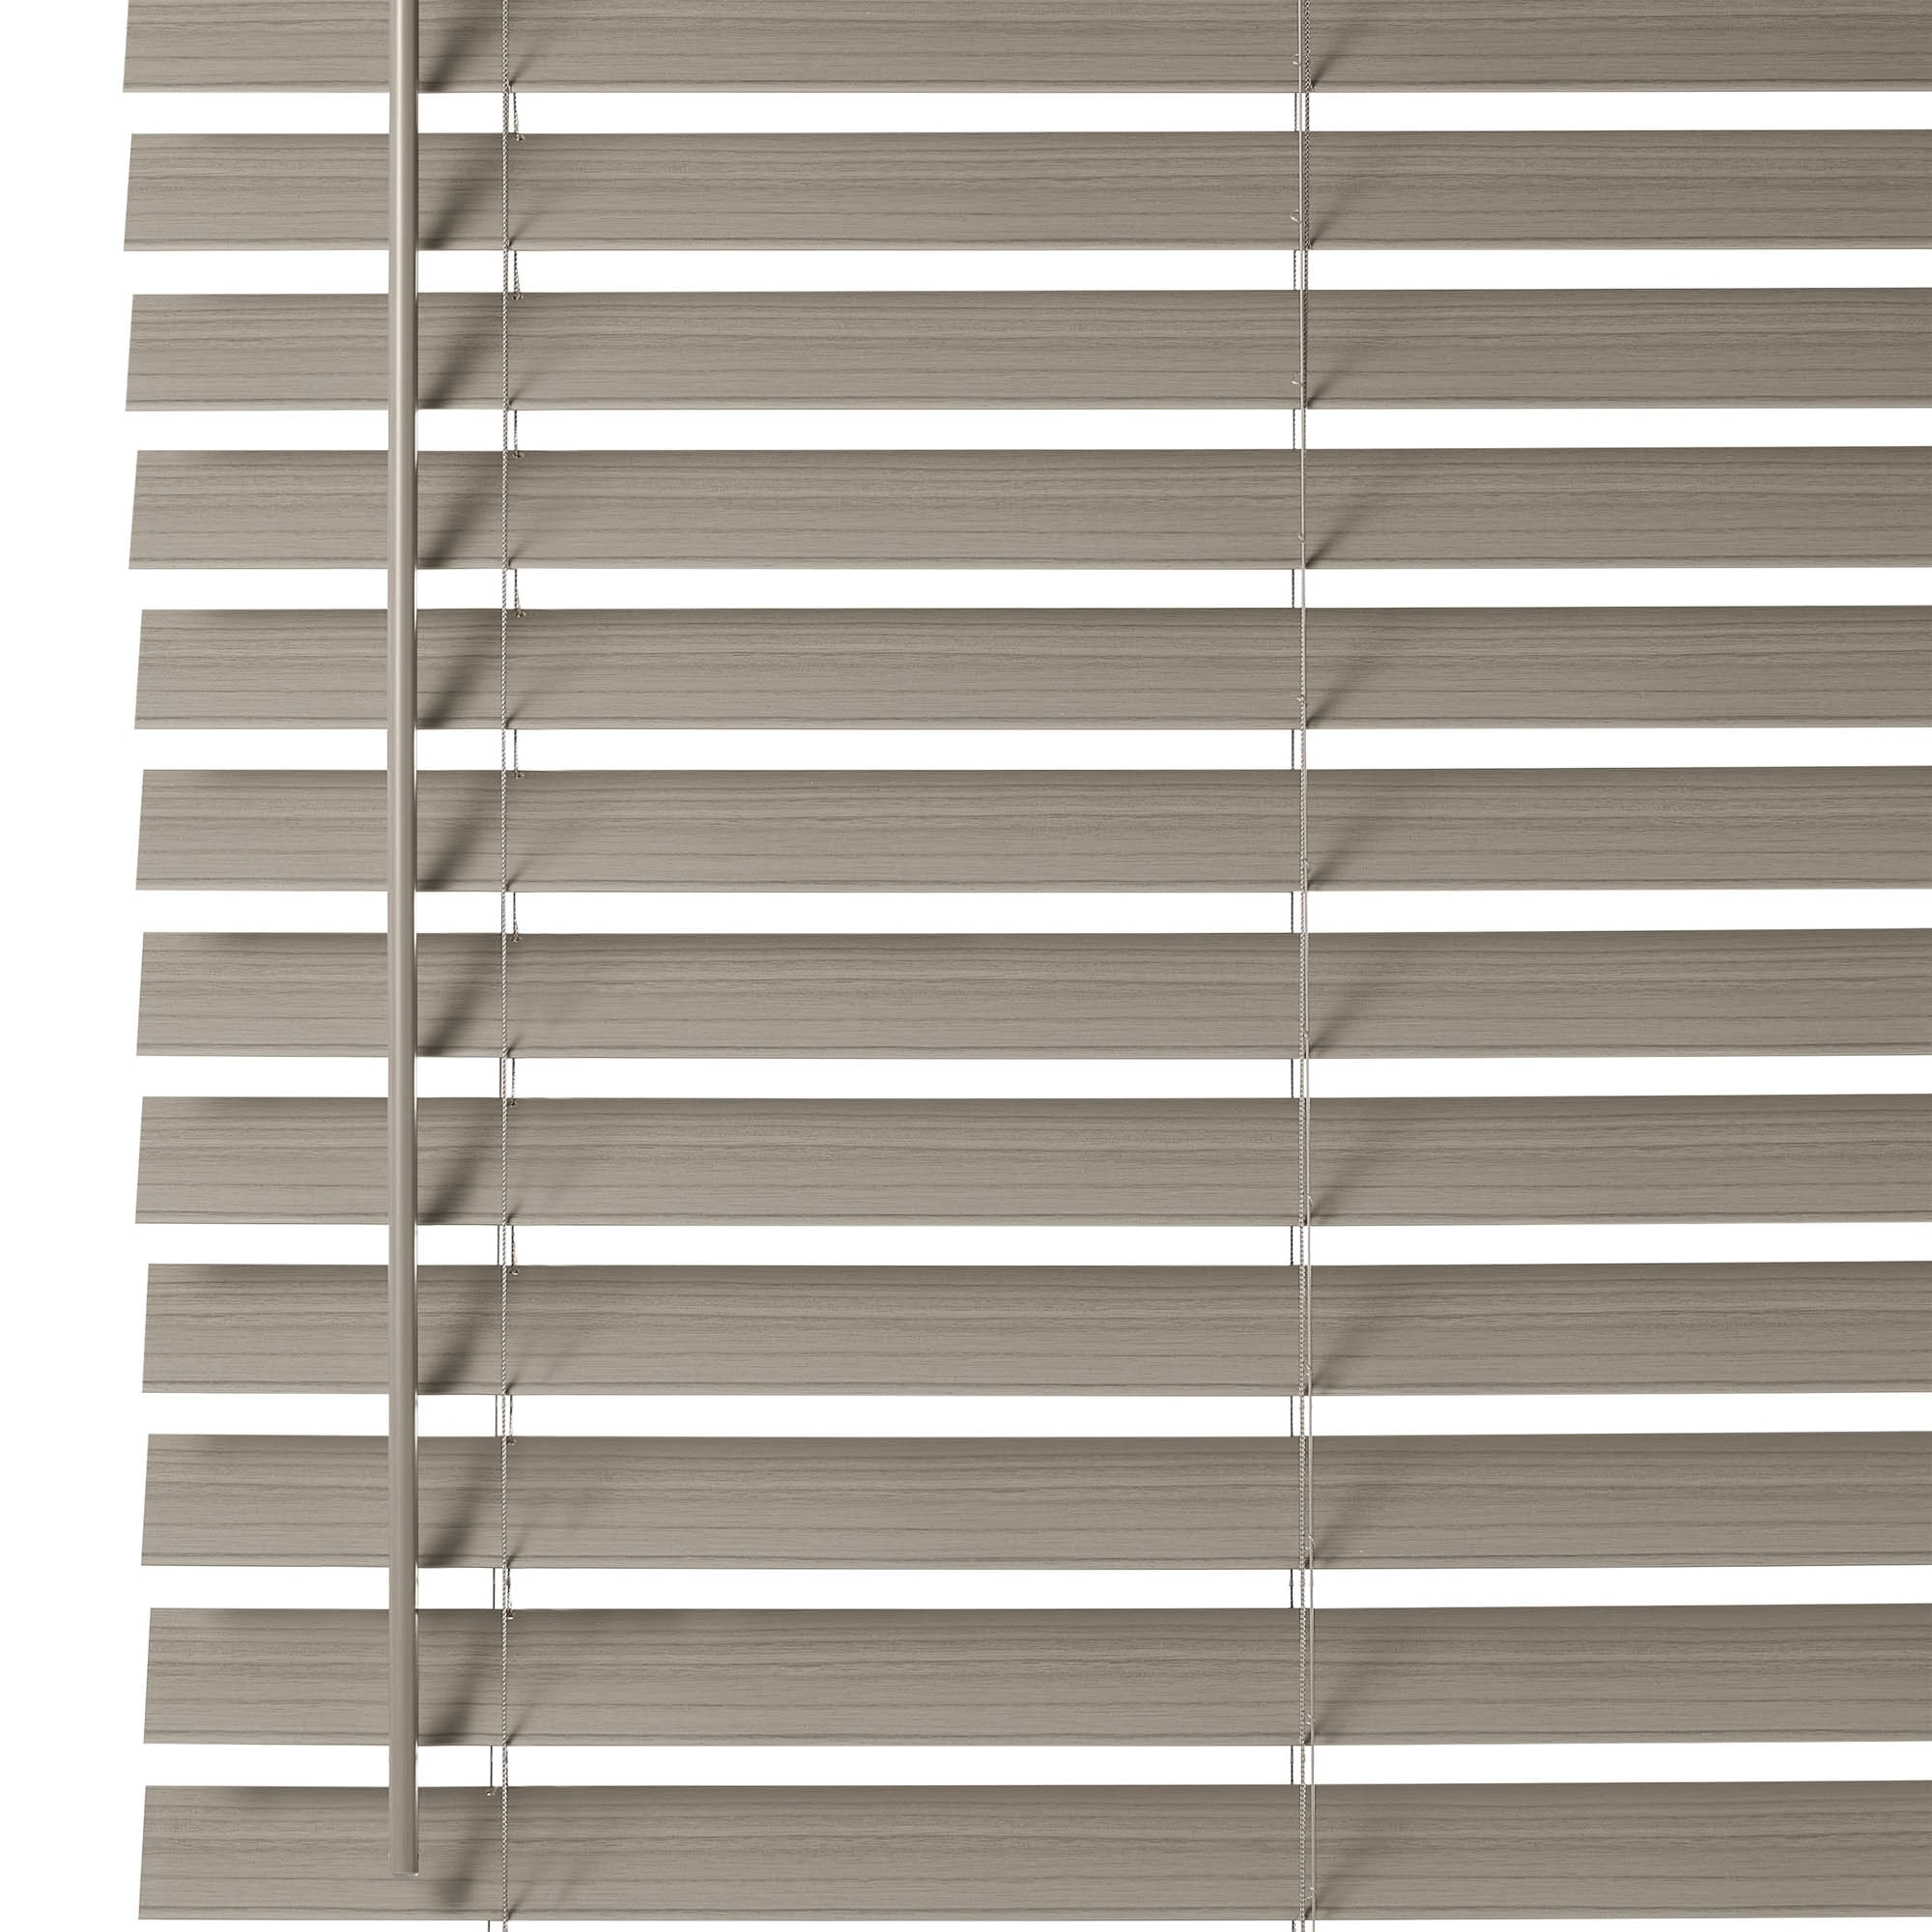 MADE TO MEASURE CALLO Faux Wooden Venetian Blinds Plastic Wood Effect 50mm slats 